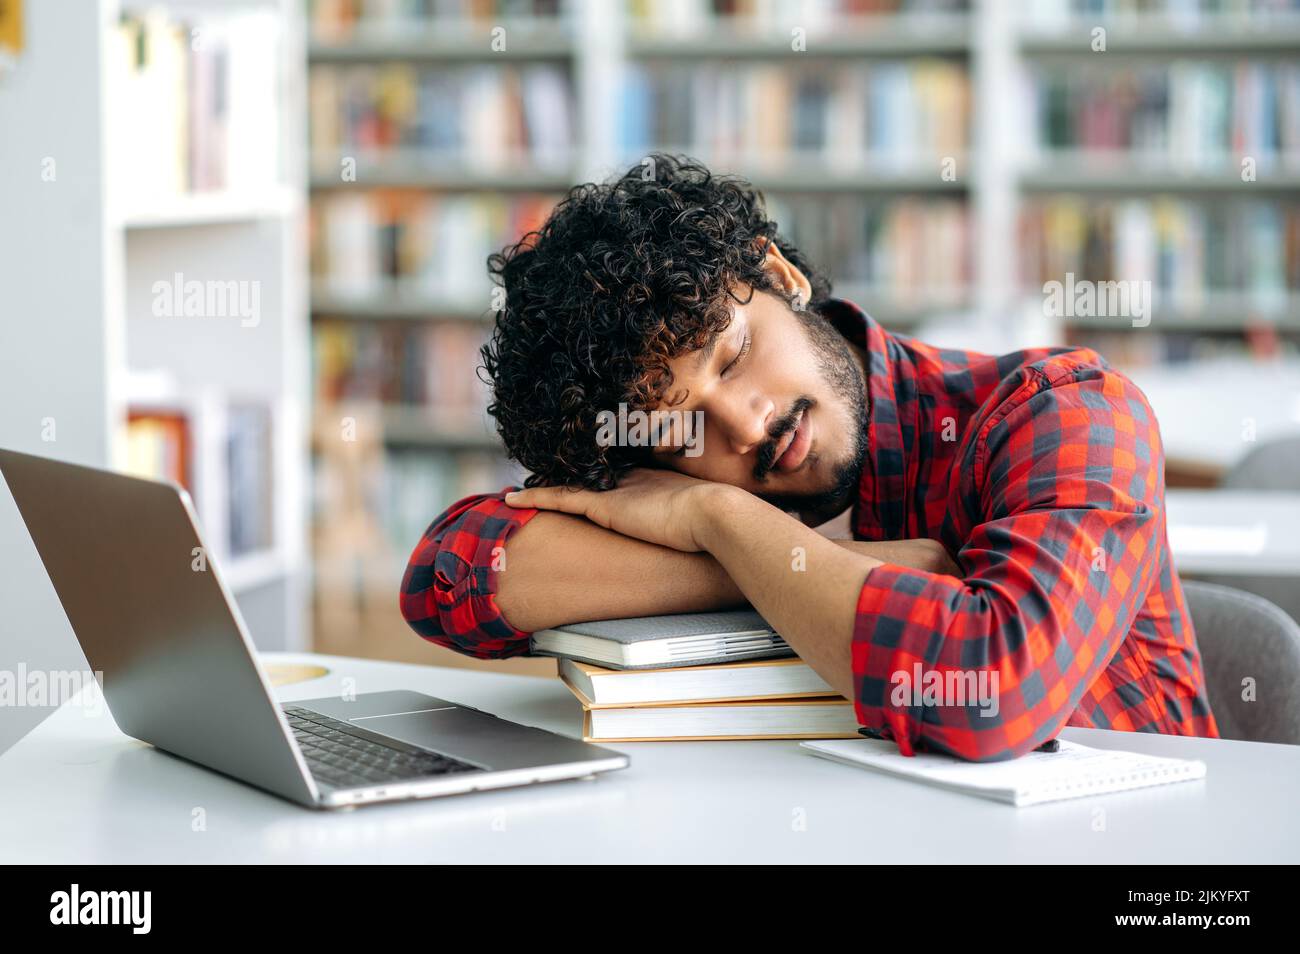 Tired bored arabian or indian university student, is sleeping while sitting at a desk in a library, exhausted of learning, preparing for exam session, suffering of stress and chronic sleep deprivation Stock Photo